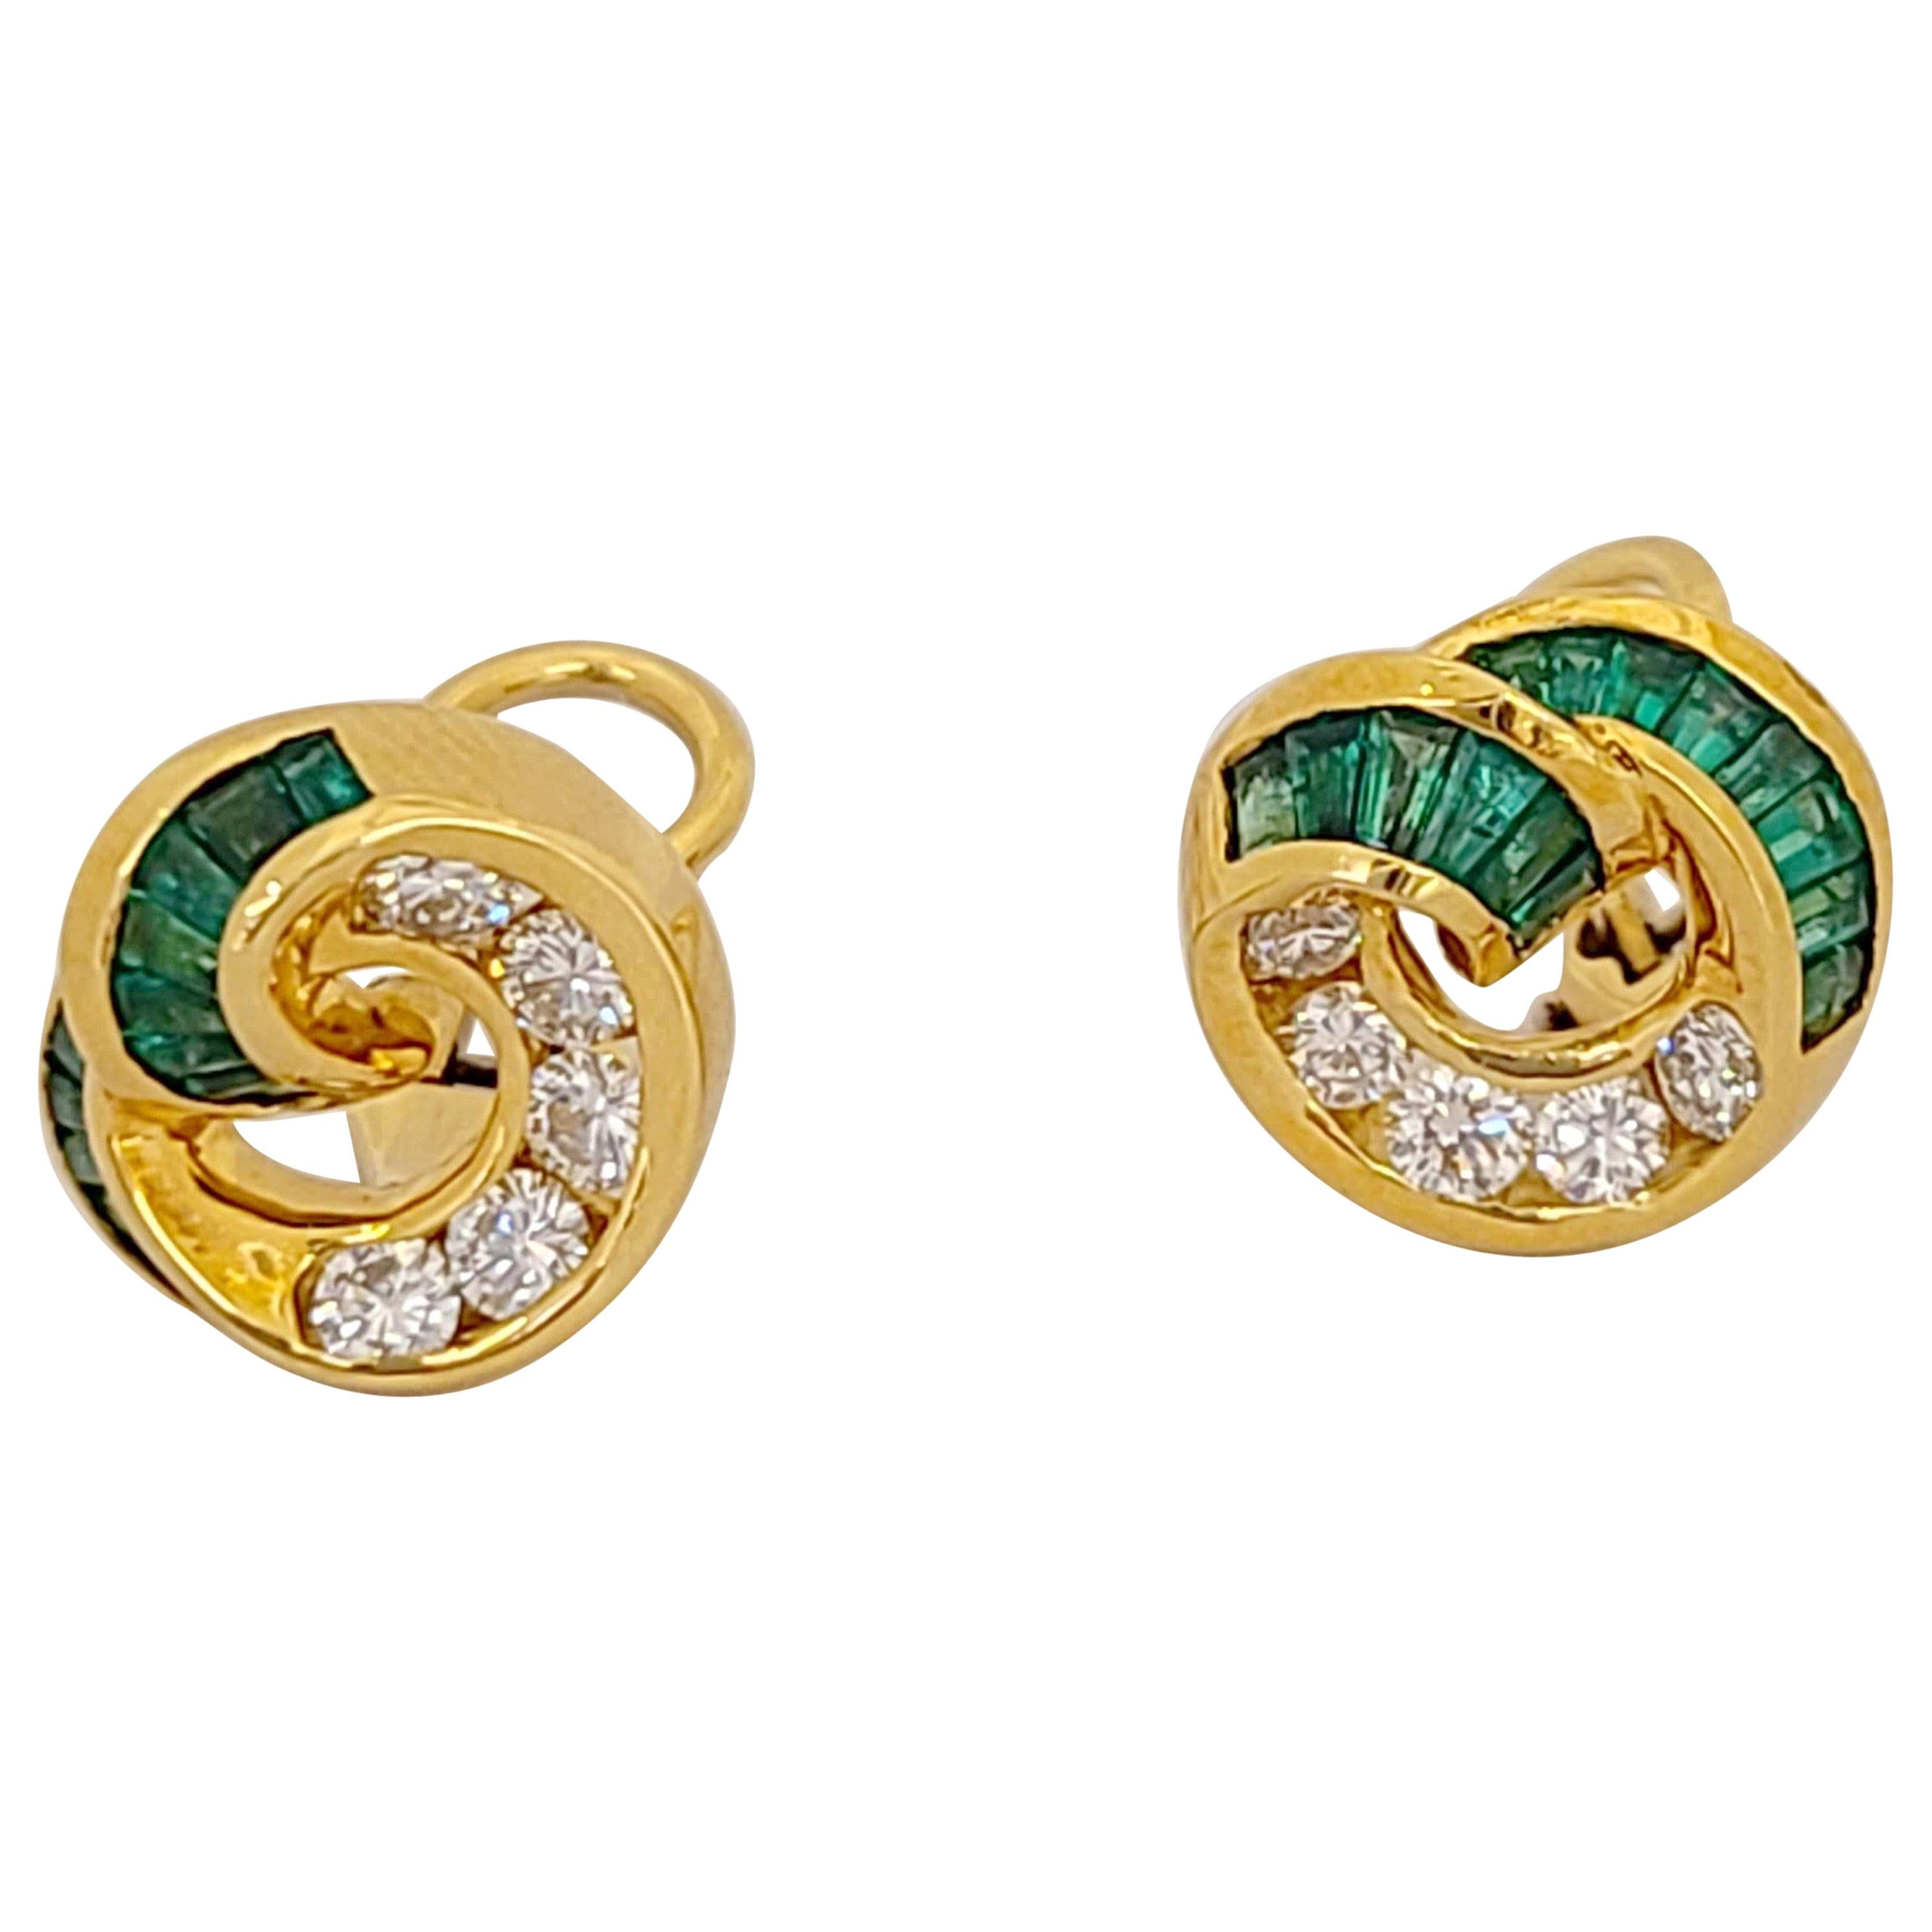 Charles Krypell 18KT Yellow Gold Earrings with 1.01Ct. Emeralds & .68Ct Diamonds